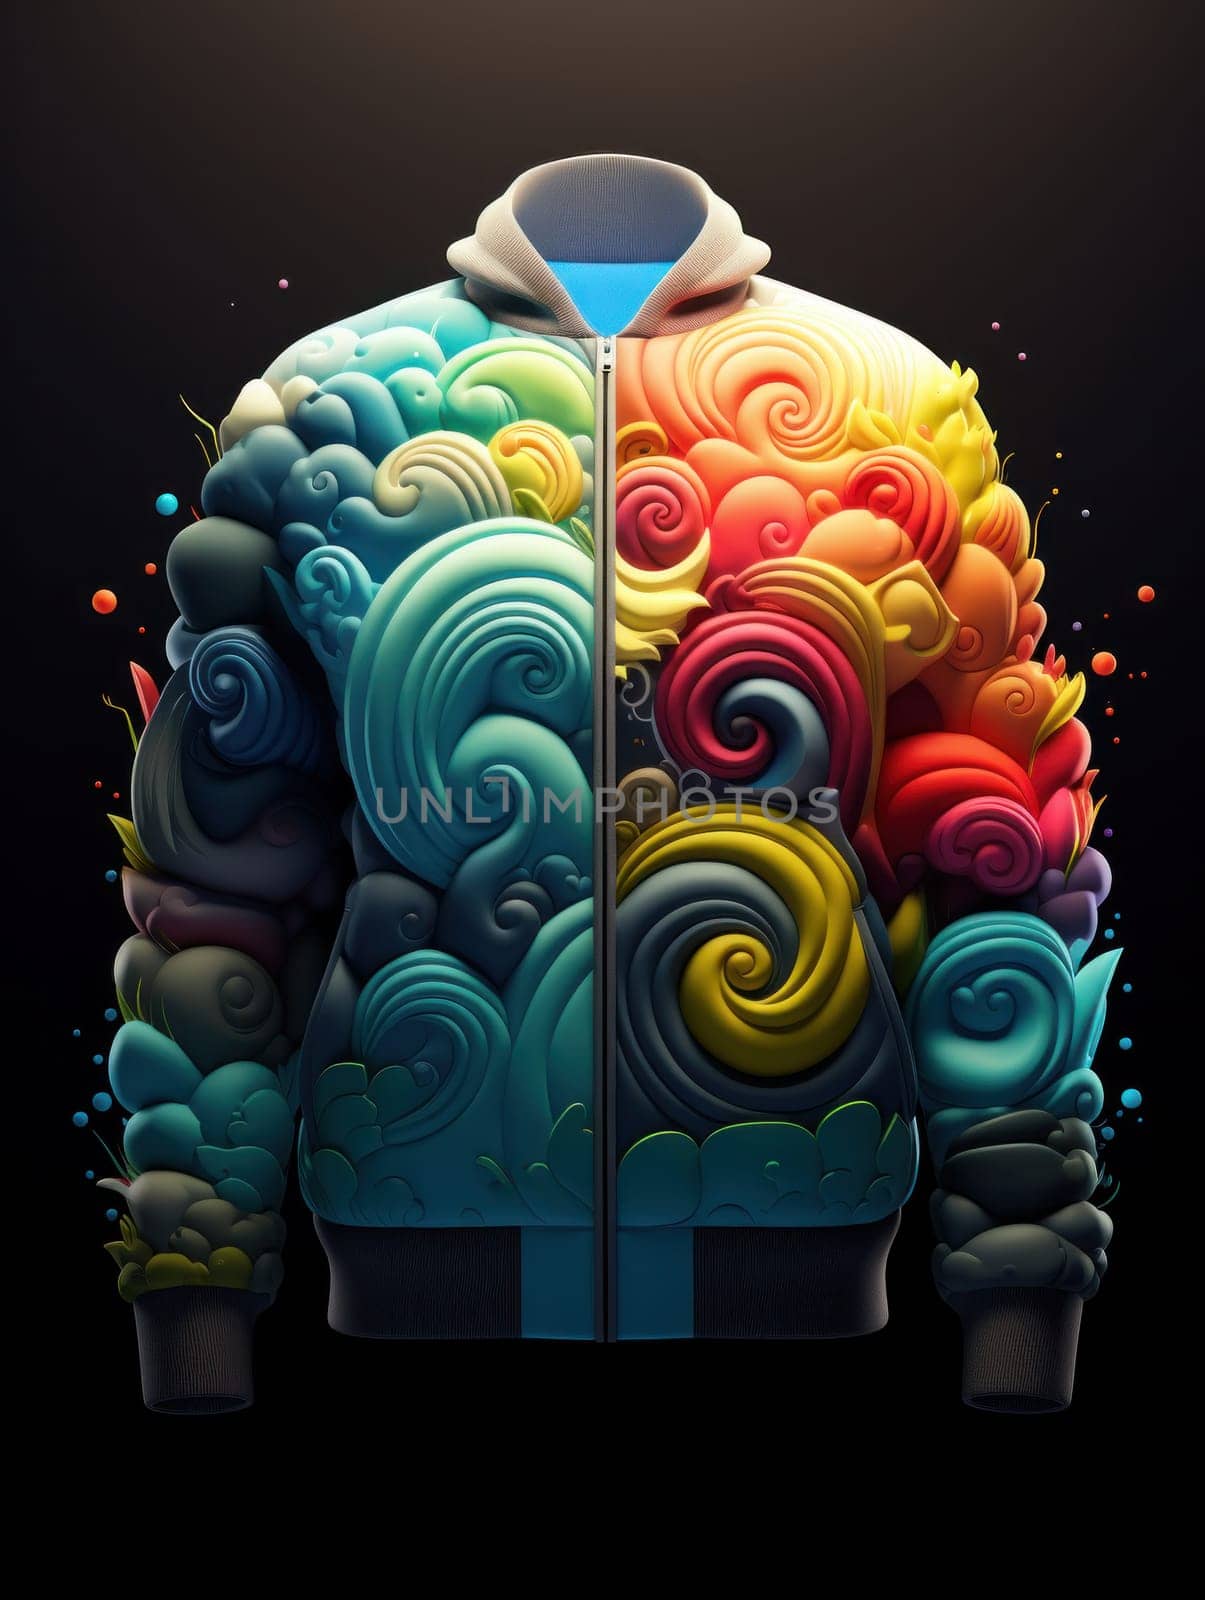 A colorful jacket with swirls and colors on it